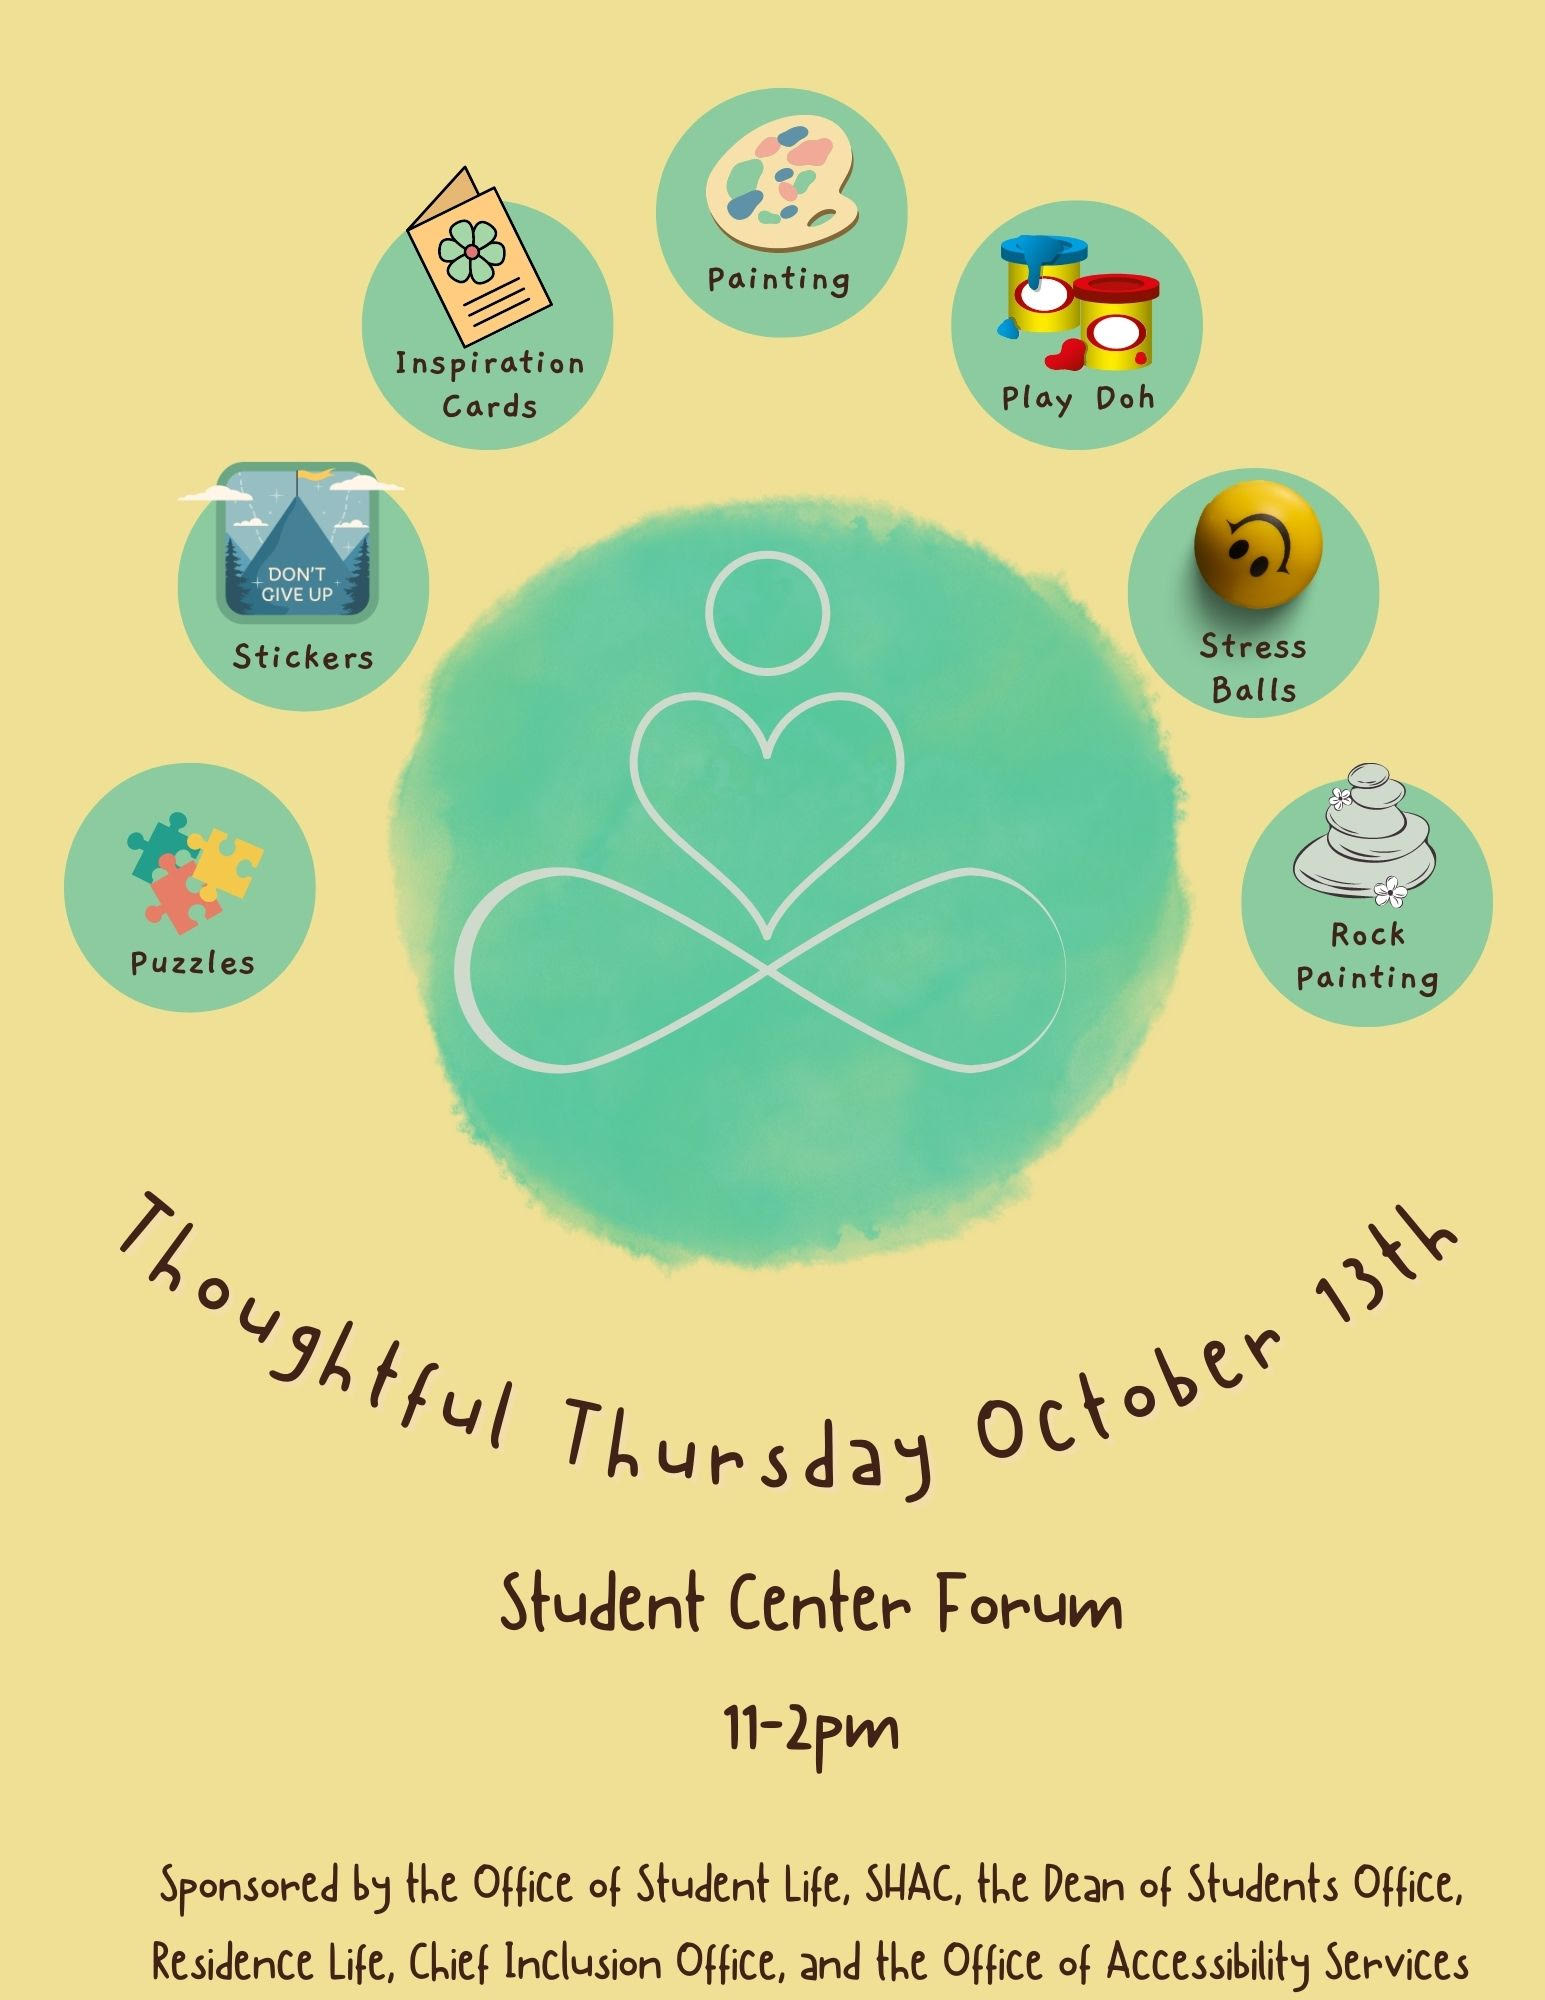 Thoughtful Thursday is on 10/13 from 11am-2pm!